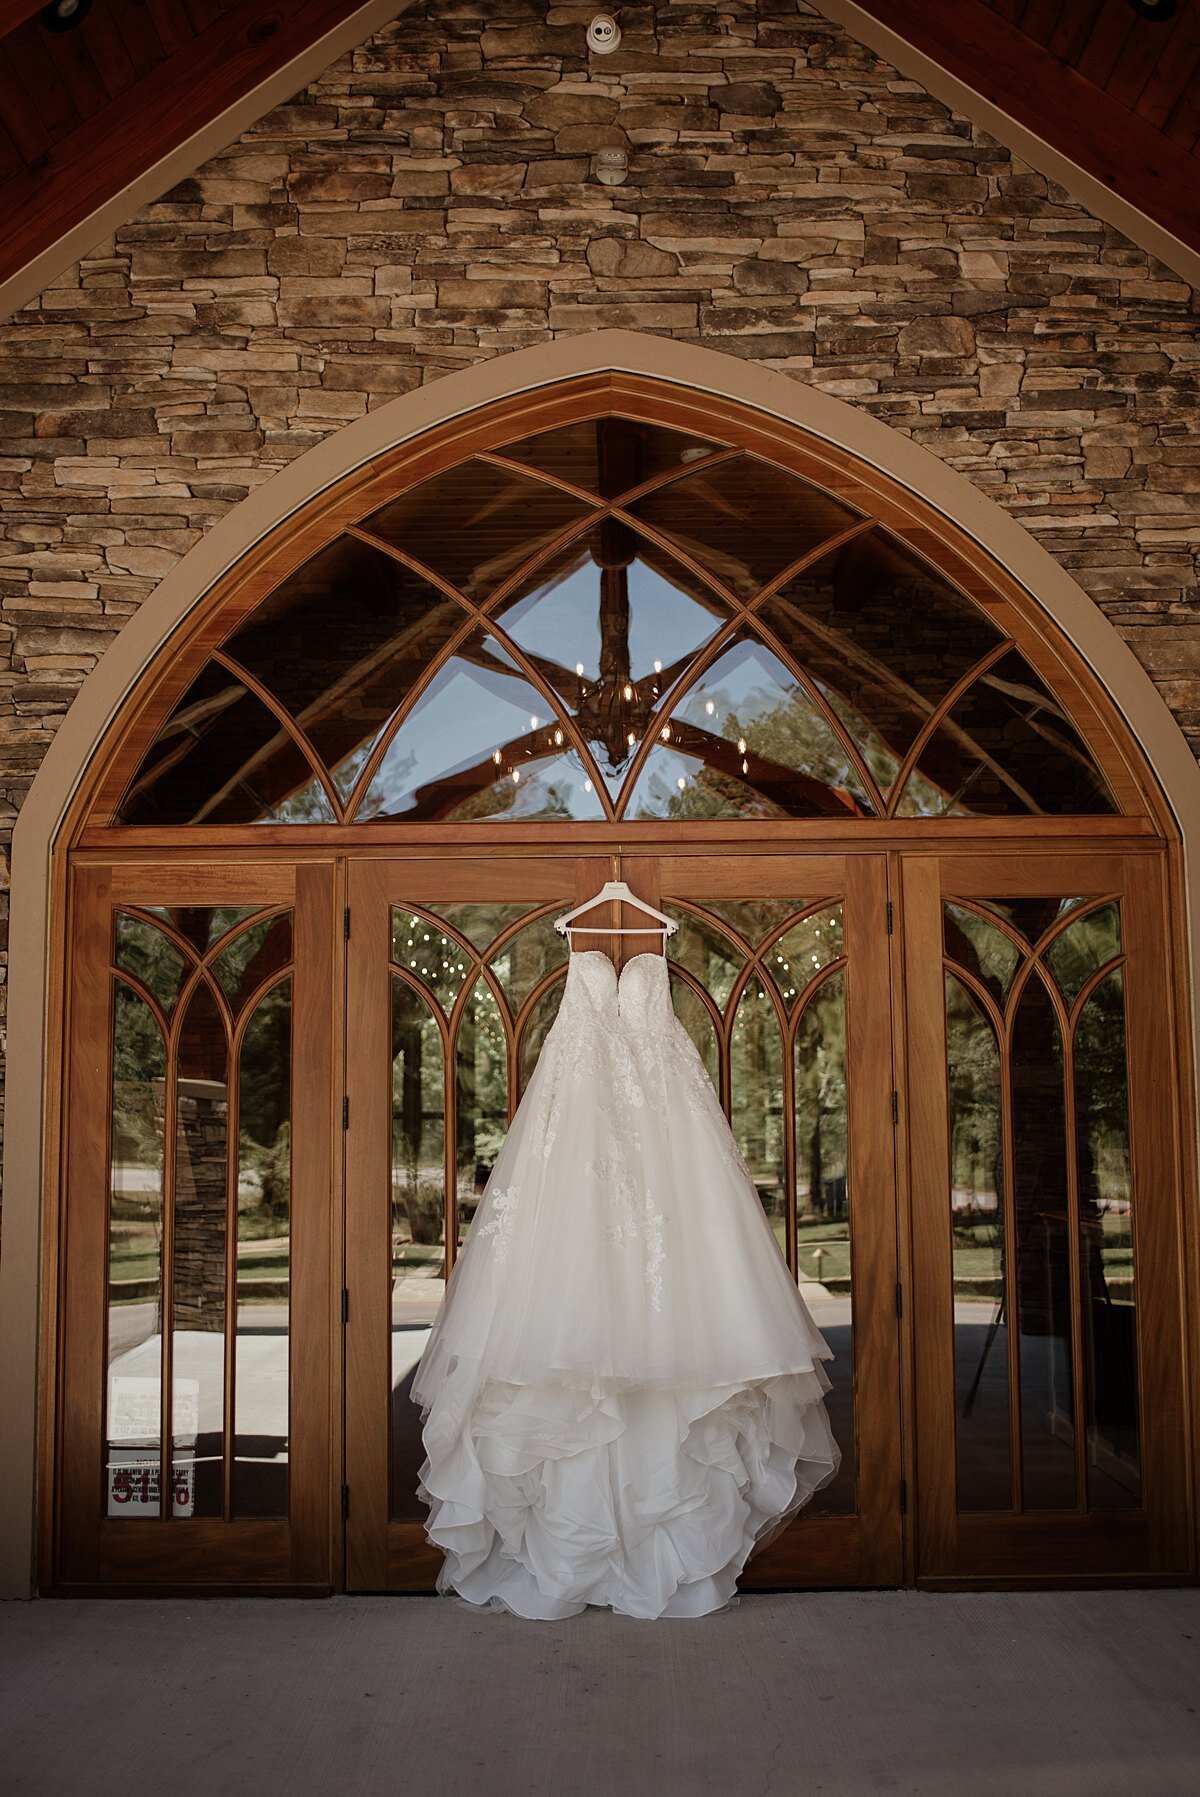 Bridal Dress in Wedding Venue like The Carriage House